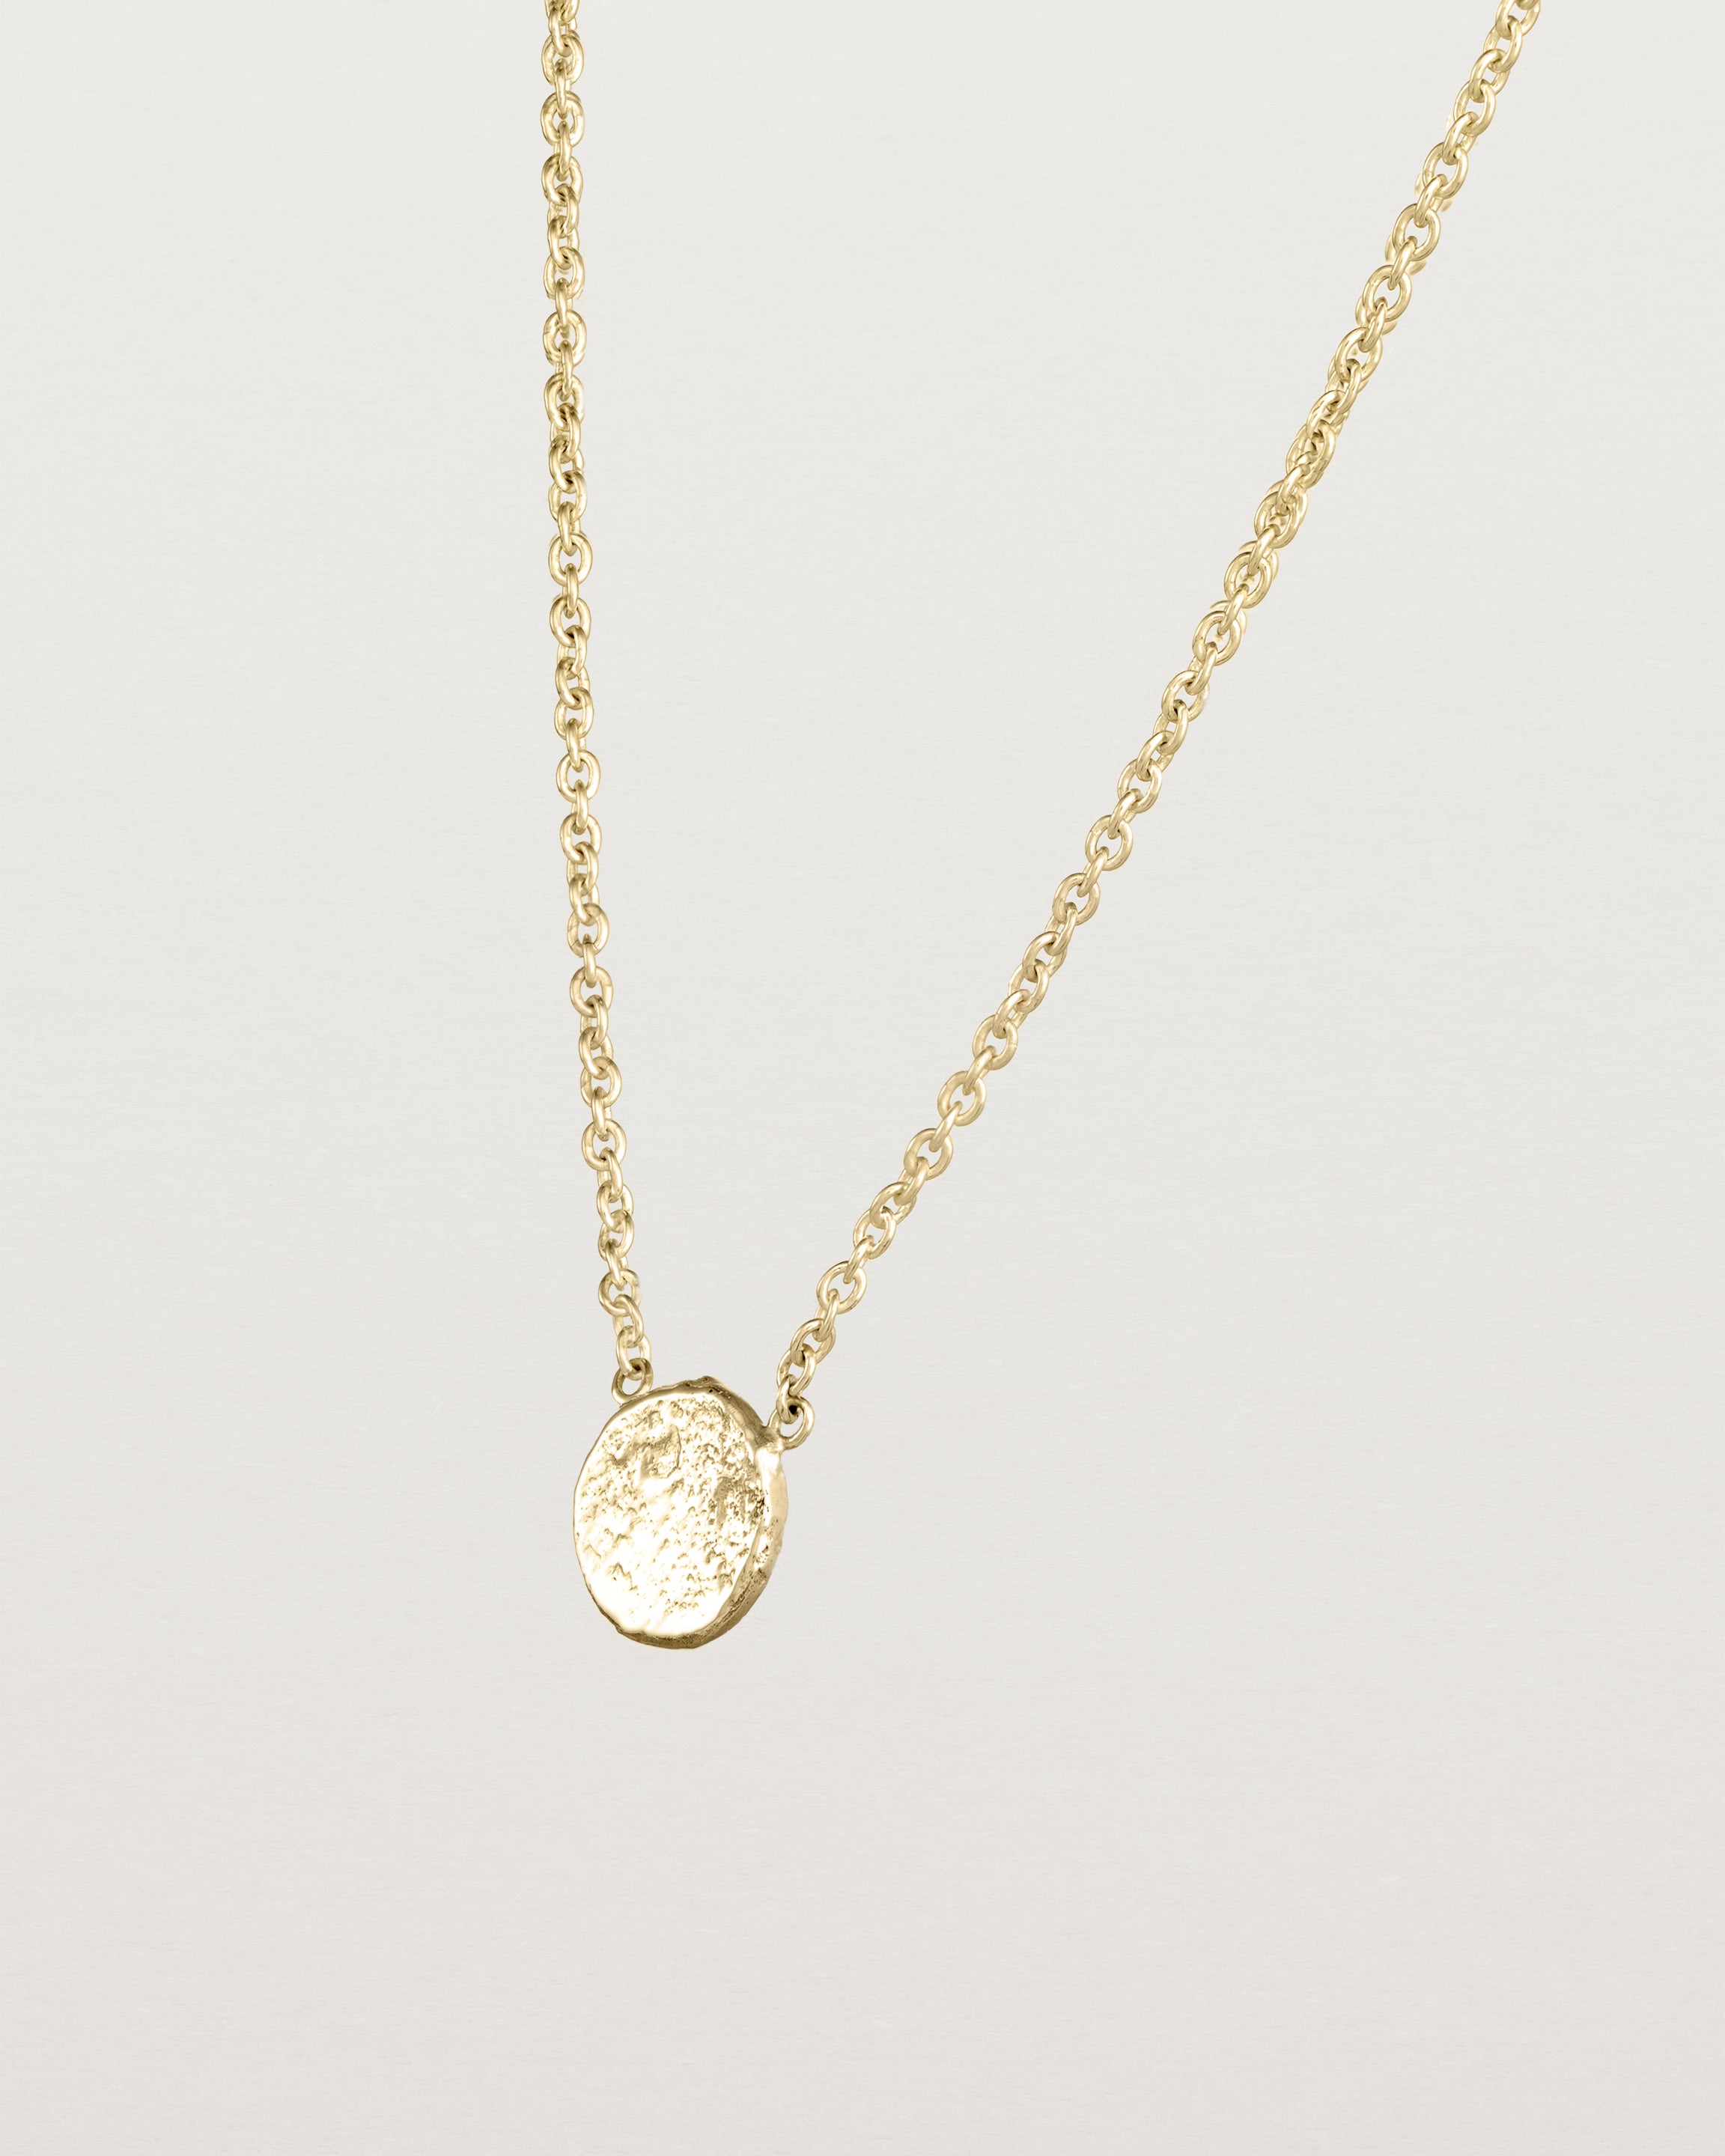 Angled view of the Moon Necklace in yellow gold.